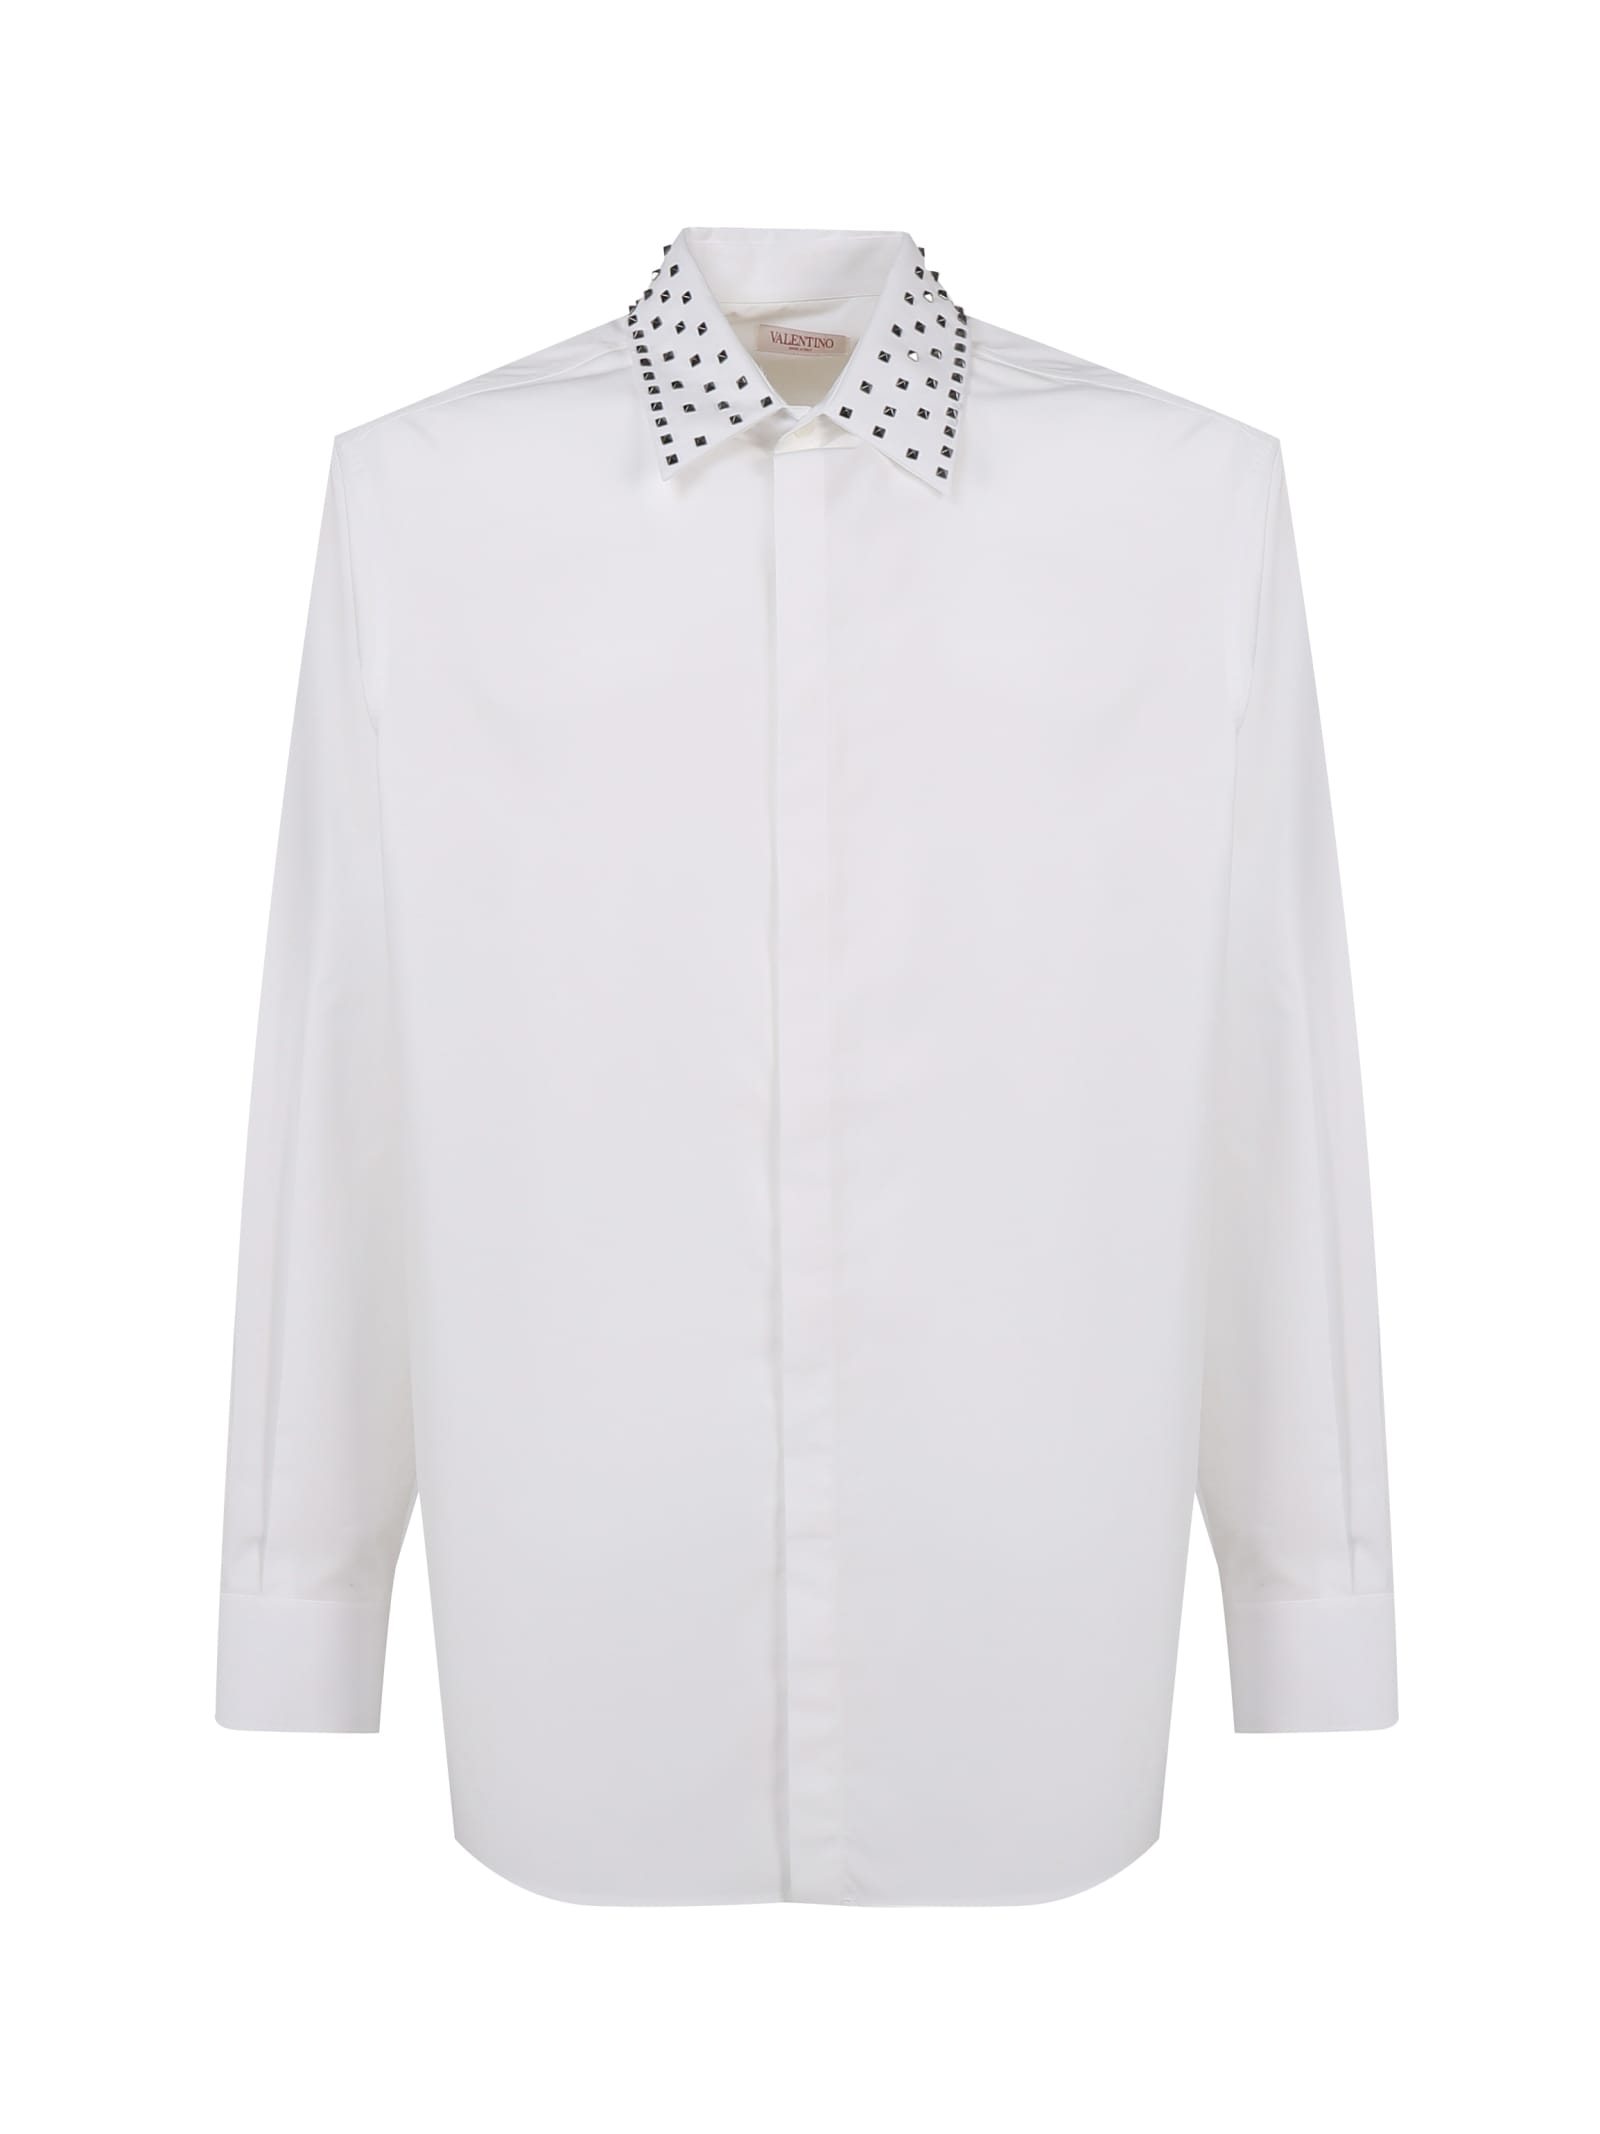 VALENTINO LONG-SLEEVED SHIRT WITH STUD COLLAR